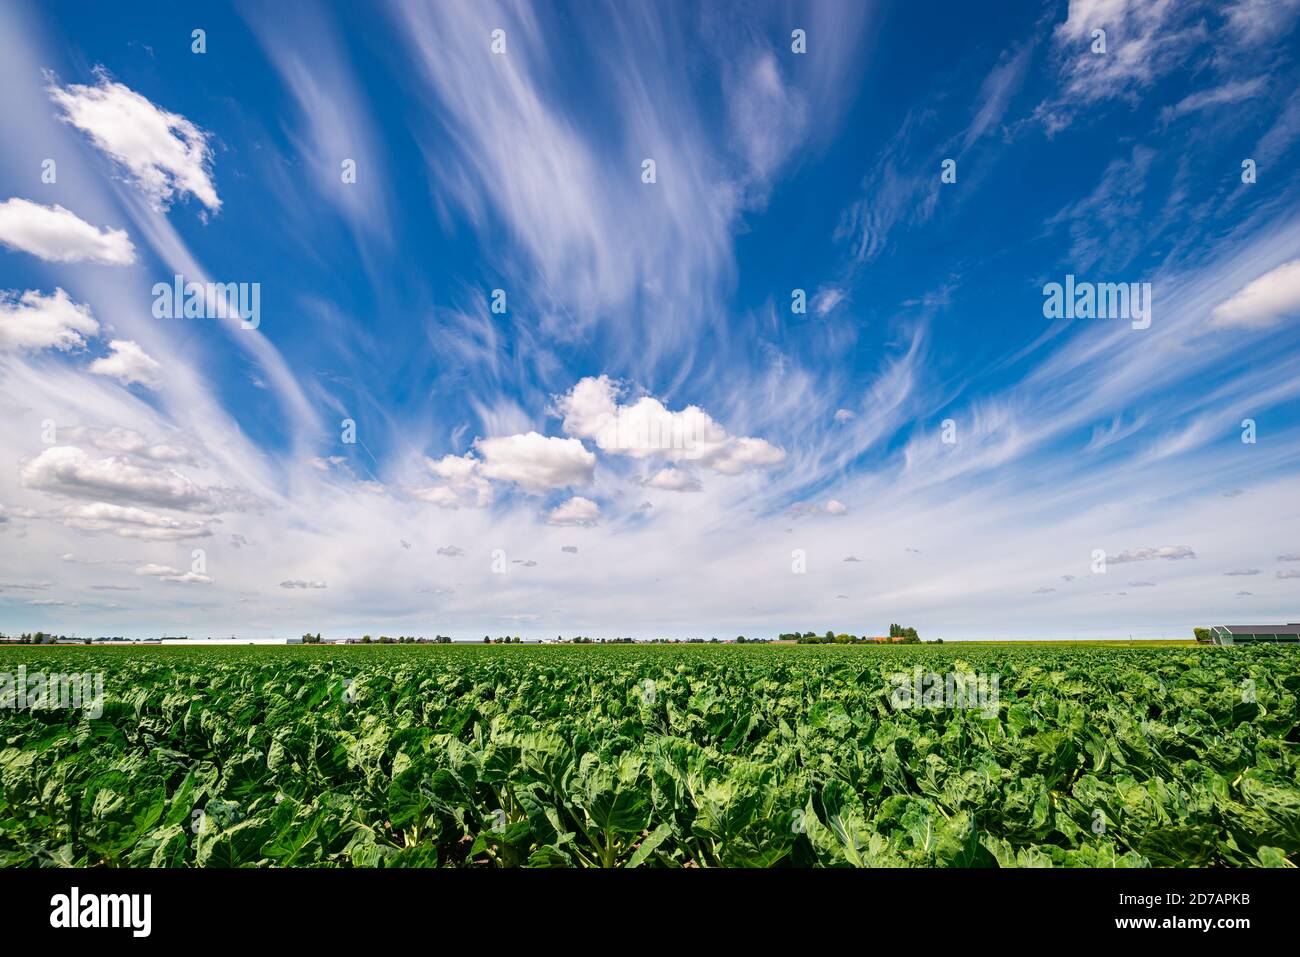 Beautiful sky with cumulus and cirrus clouds over wide open countryside Stock Photo